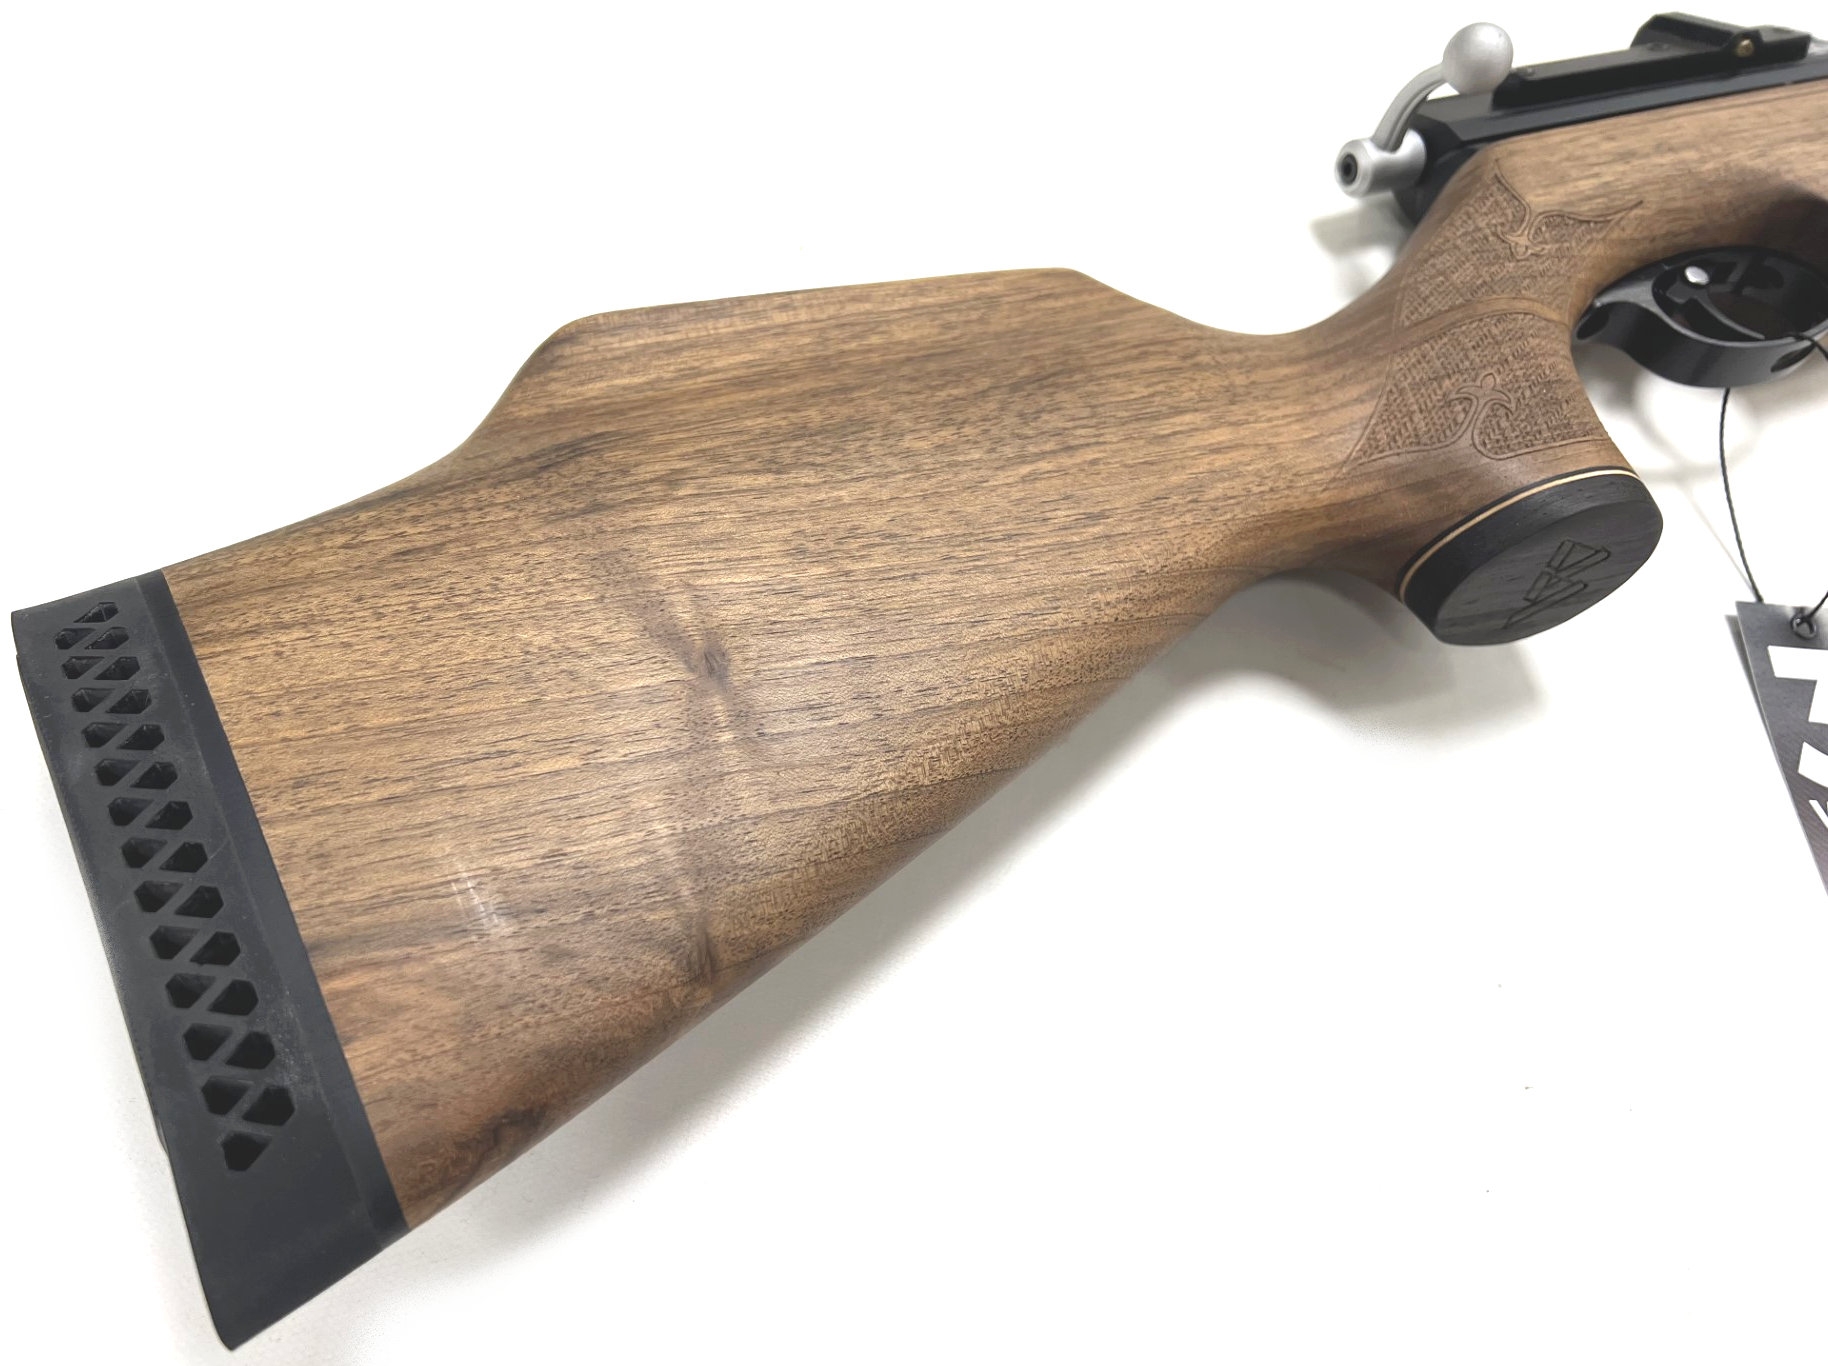 Air Arms S410F Carbine Walnut .177 Pre-Charged Air Rifle - 231109/007 Image 4